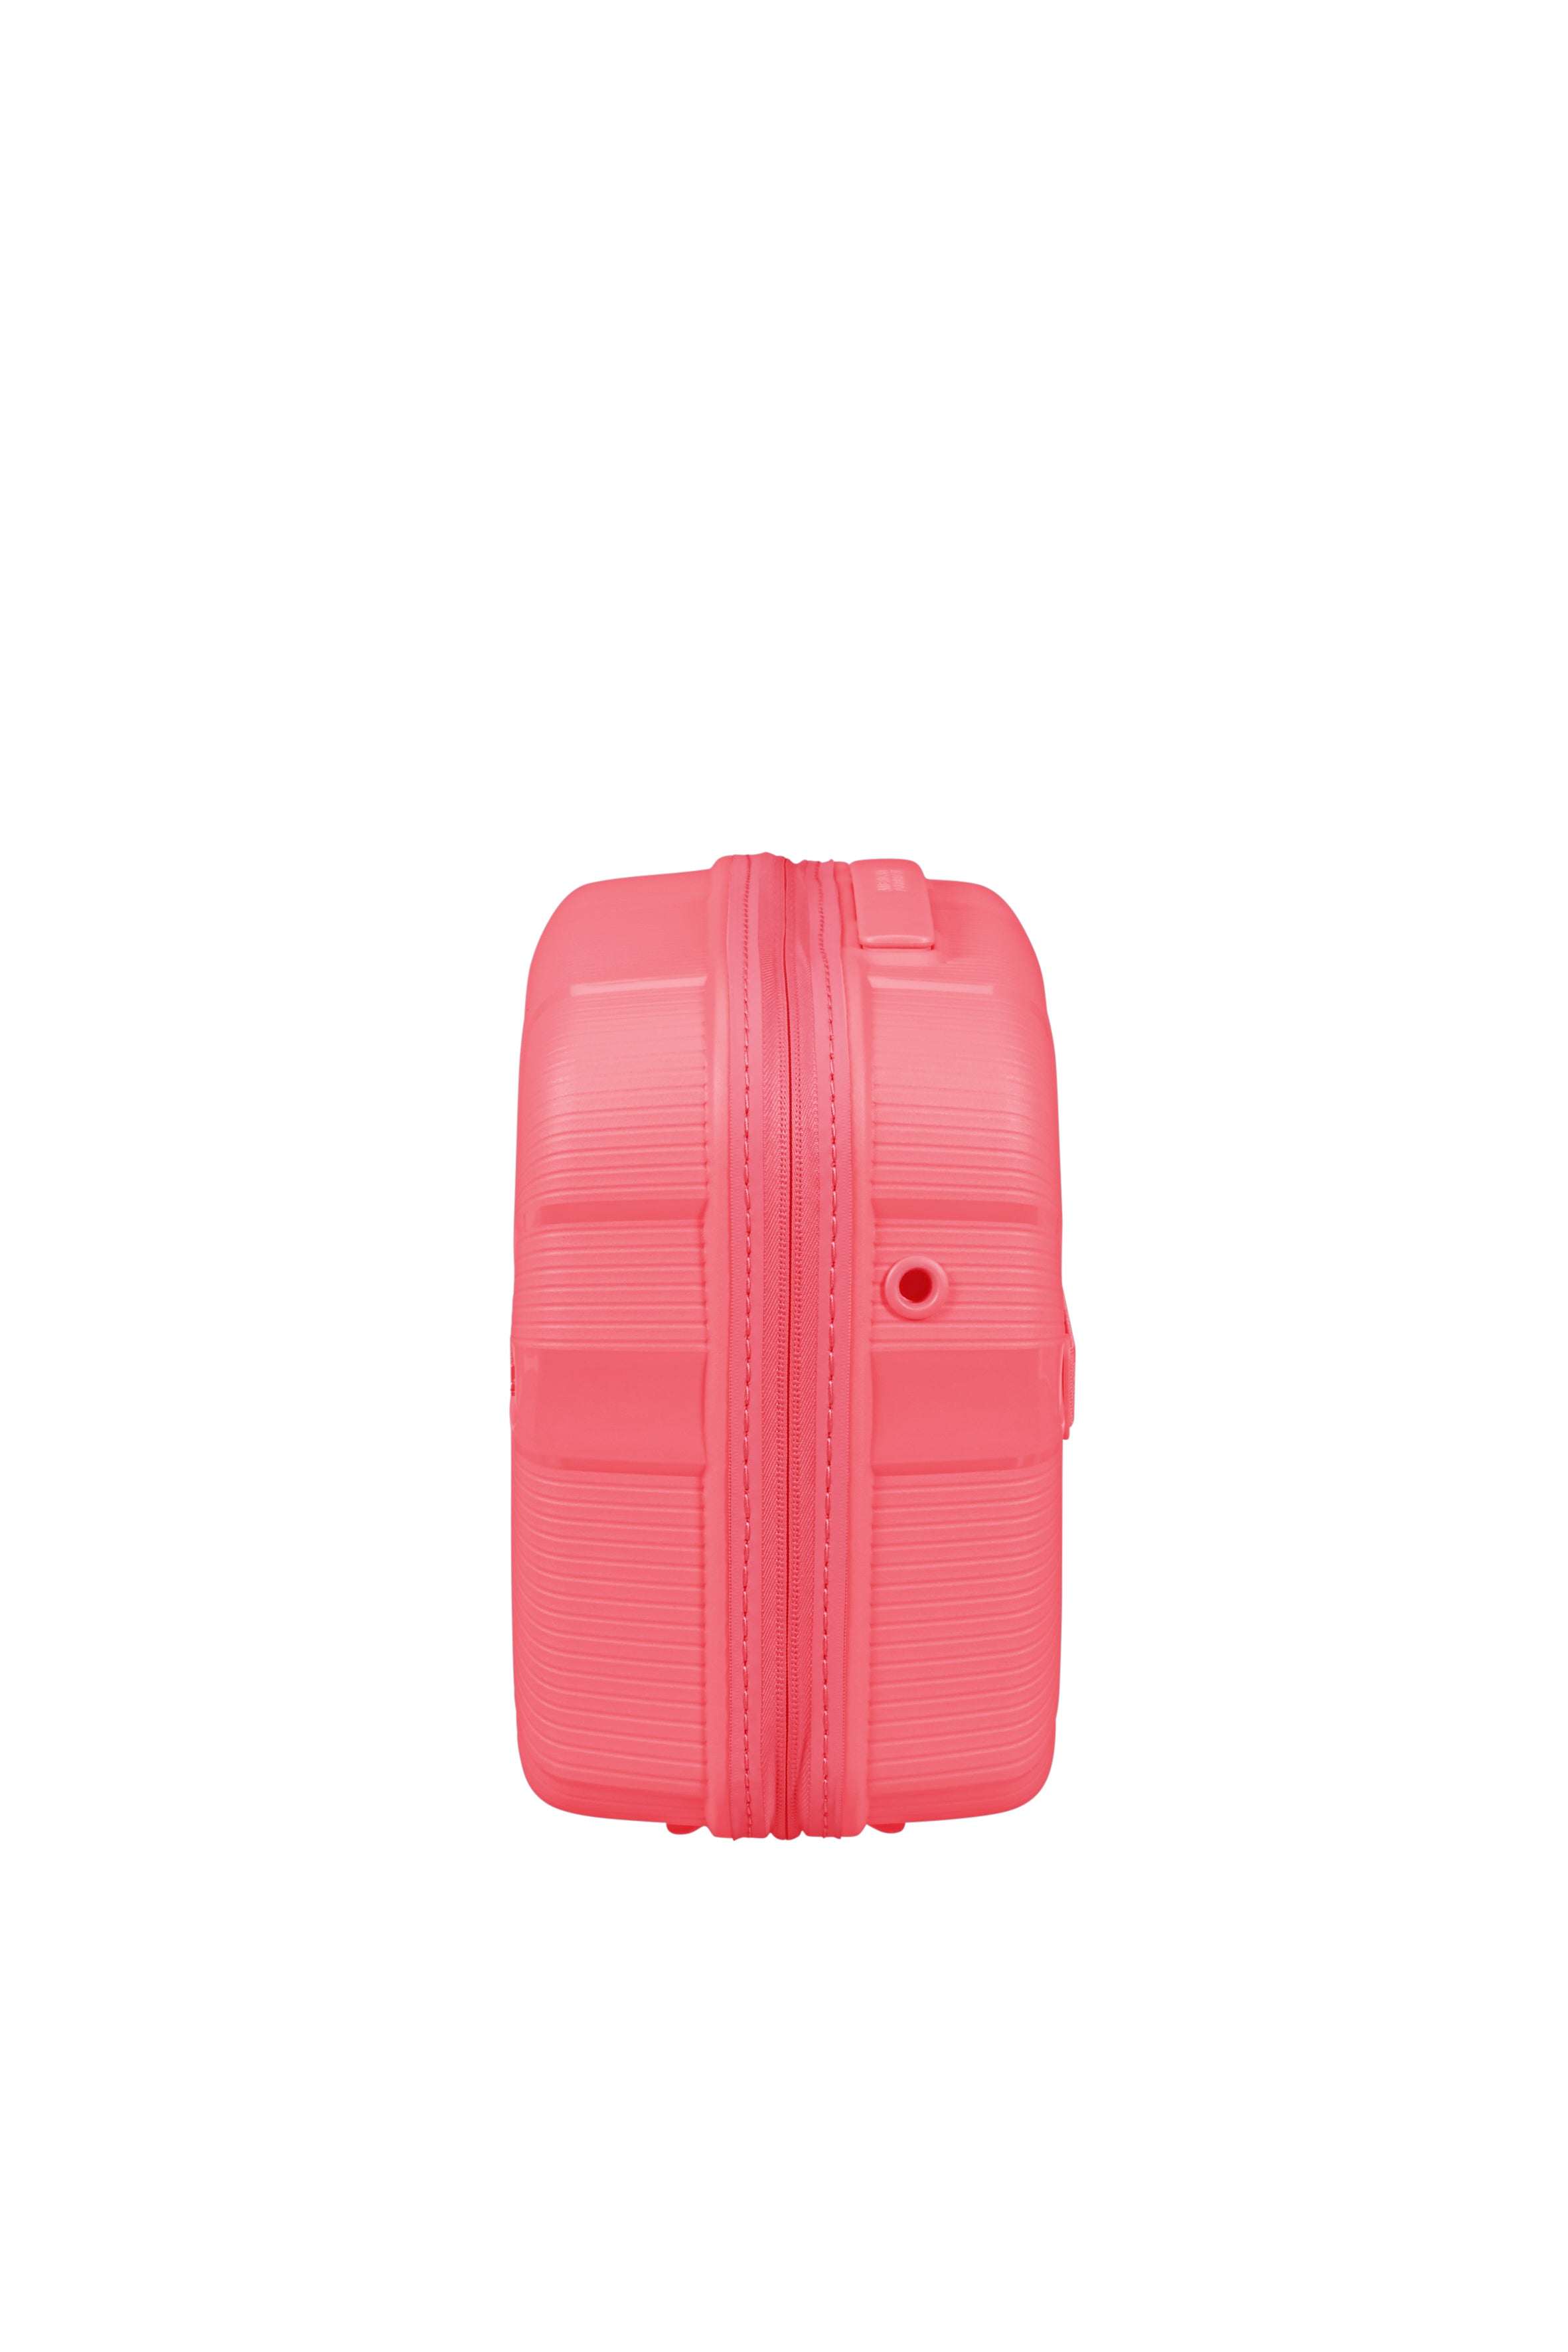 American Tourister - Star Vibe Beauty Case - Sun kissed Coral-5